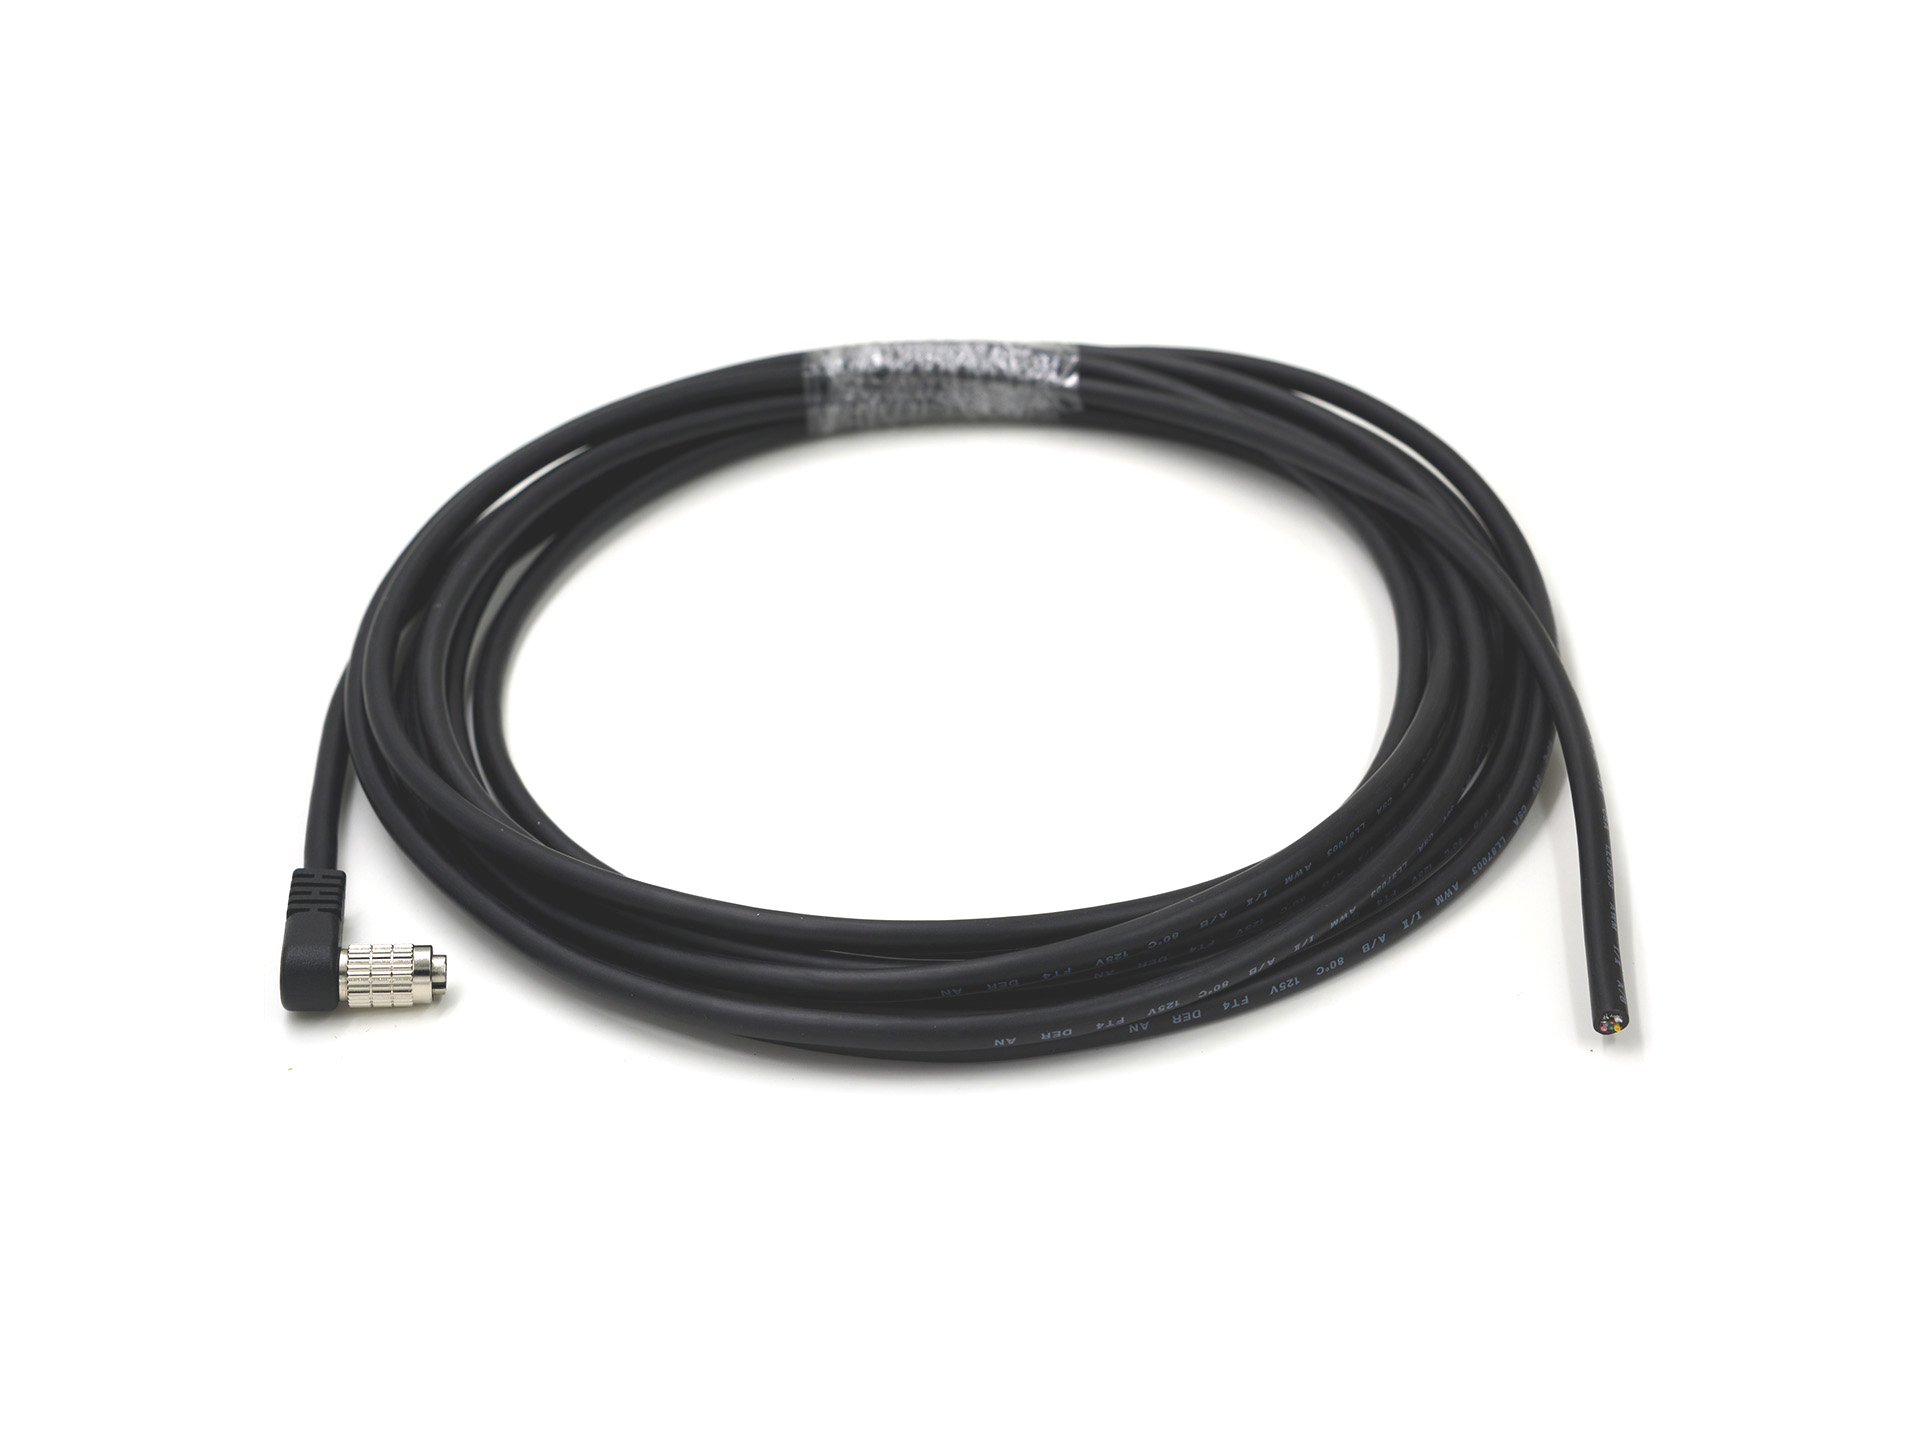 Hirose 8-pin angle female cable for power supply/io trigger